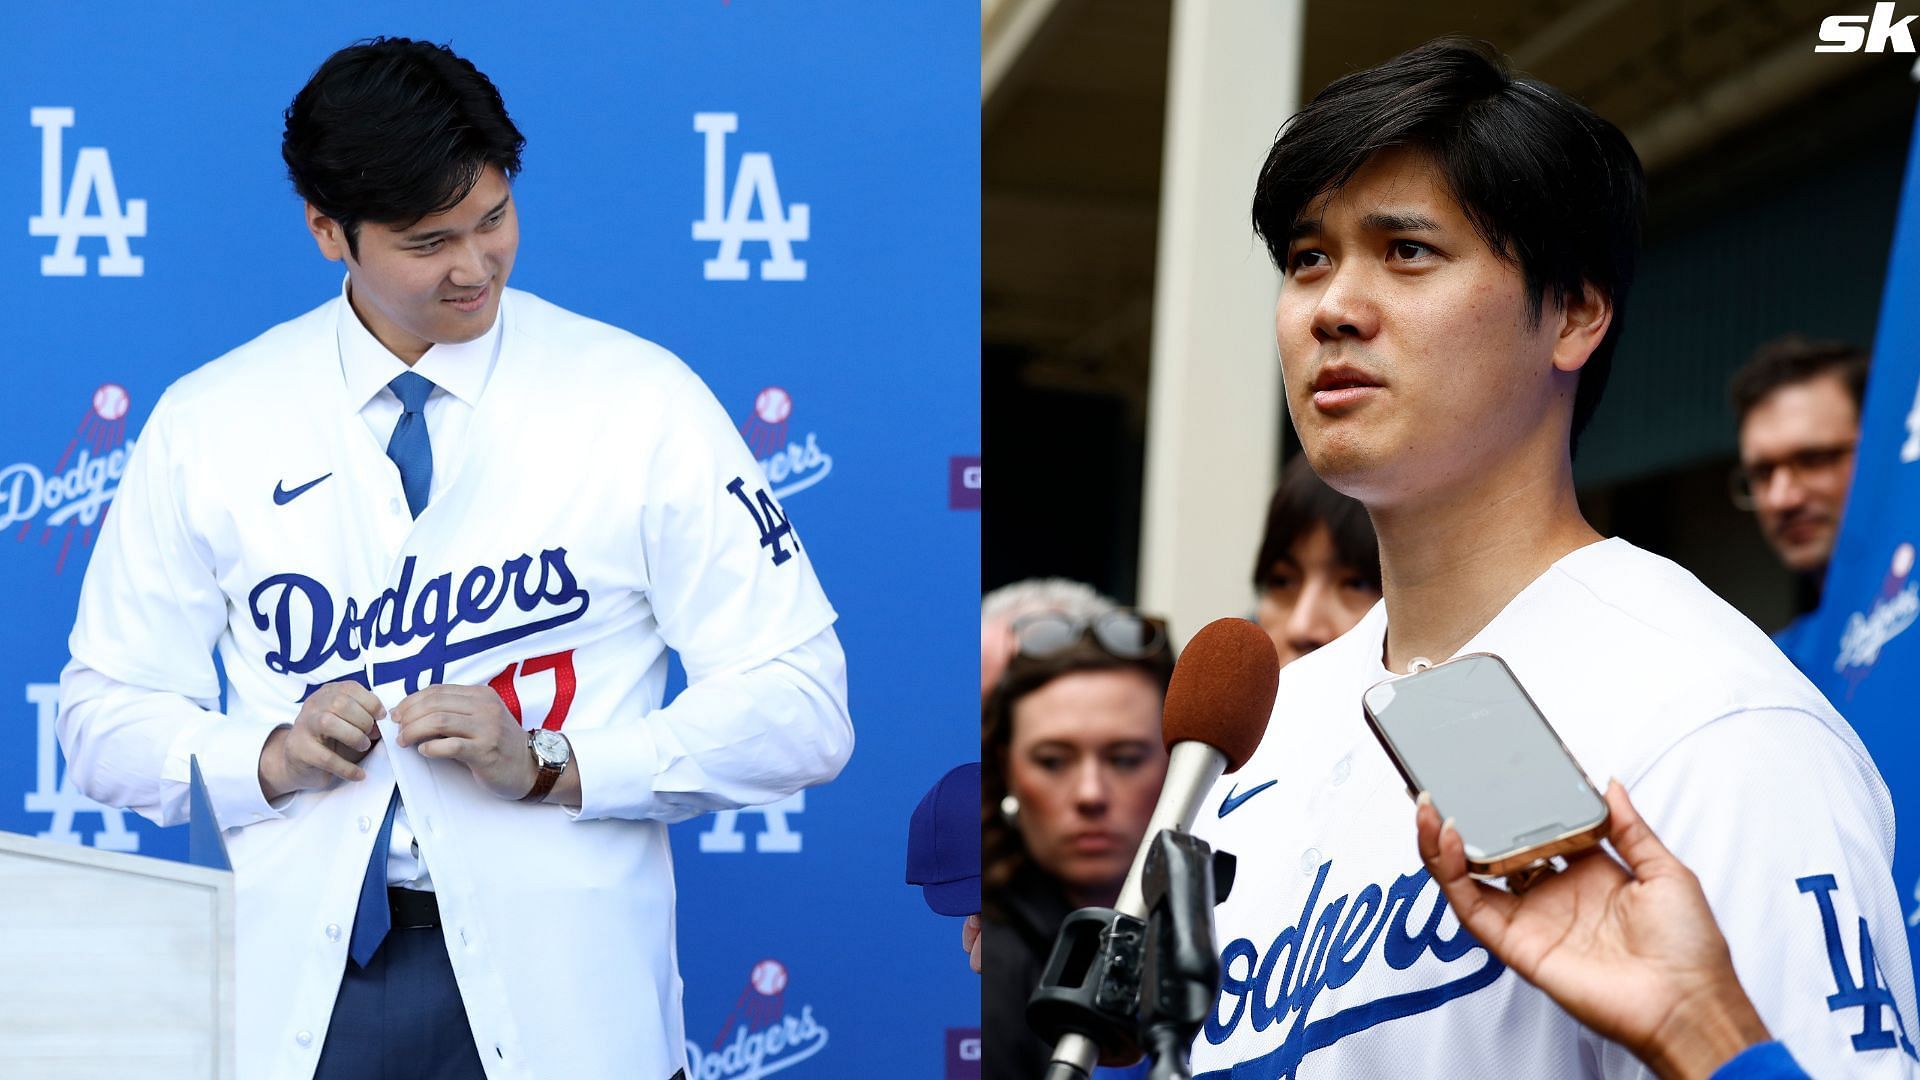 Shohei Ohtani of the Los Angeles Dodgers speaks with the media during DodgerFest at Dodger Stadium